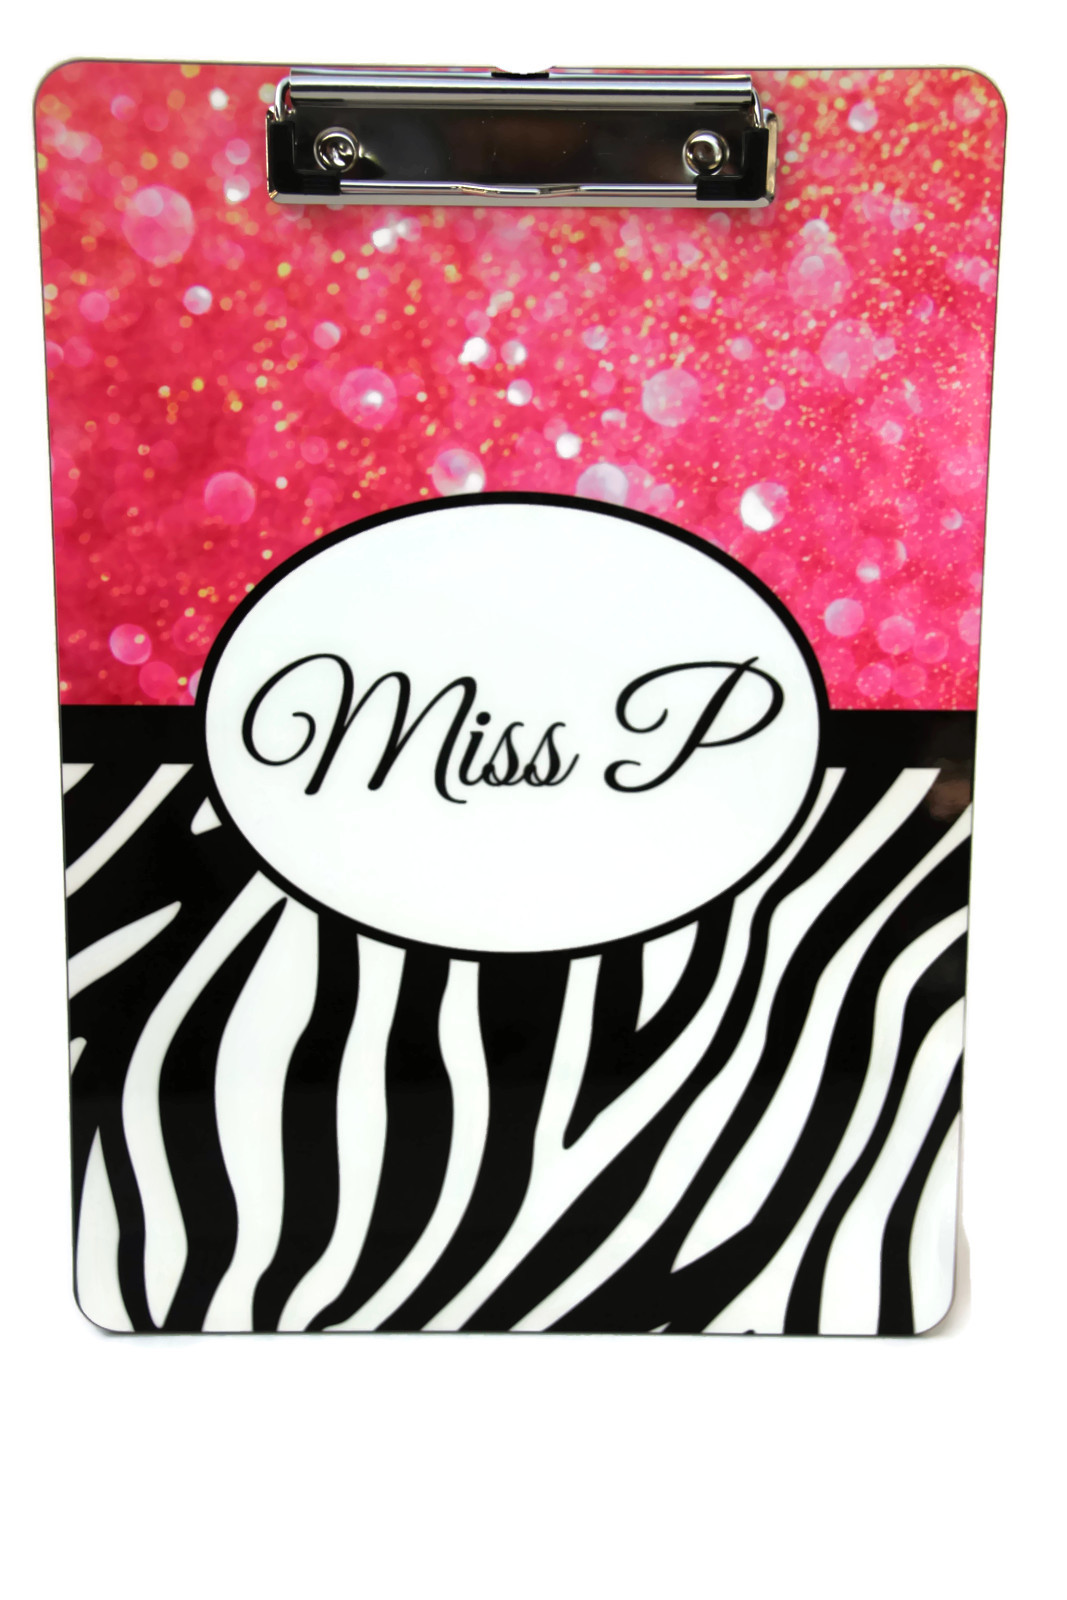 Zebra Teacher Clipboard made with sublimation printing